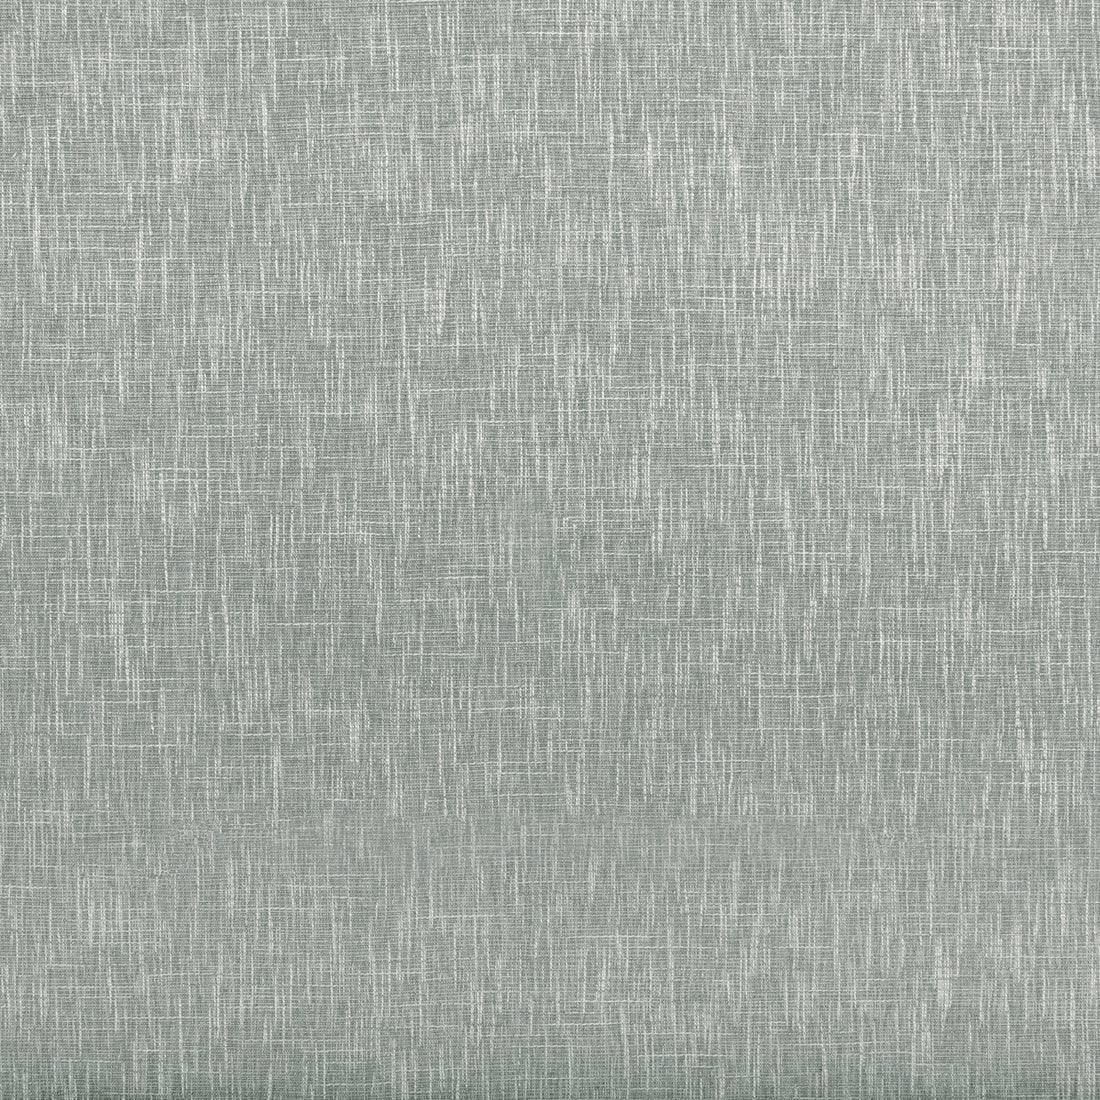 Maris fabric in grey color - pattern 35923.1121.0 - by Kravet Basics in the Monterey collection